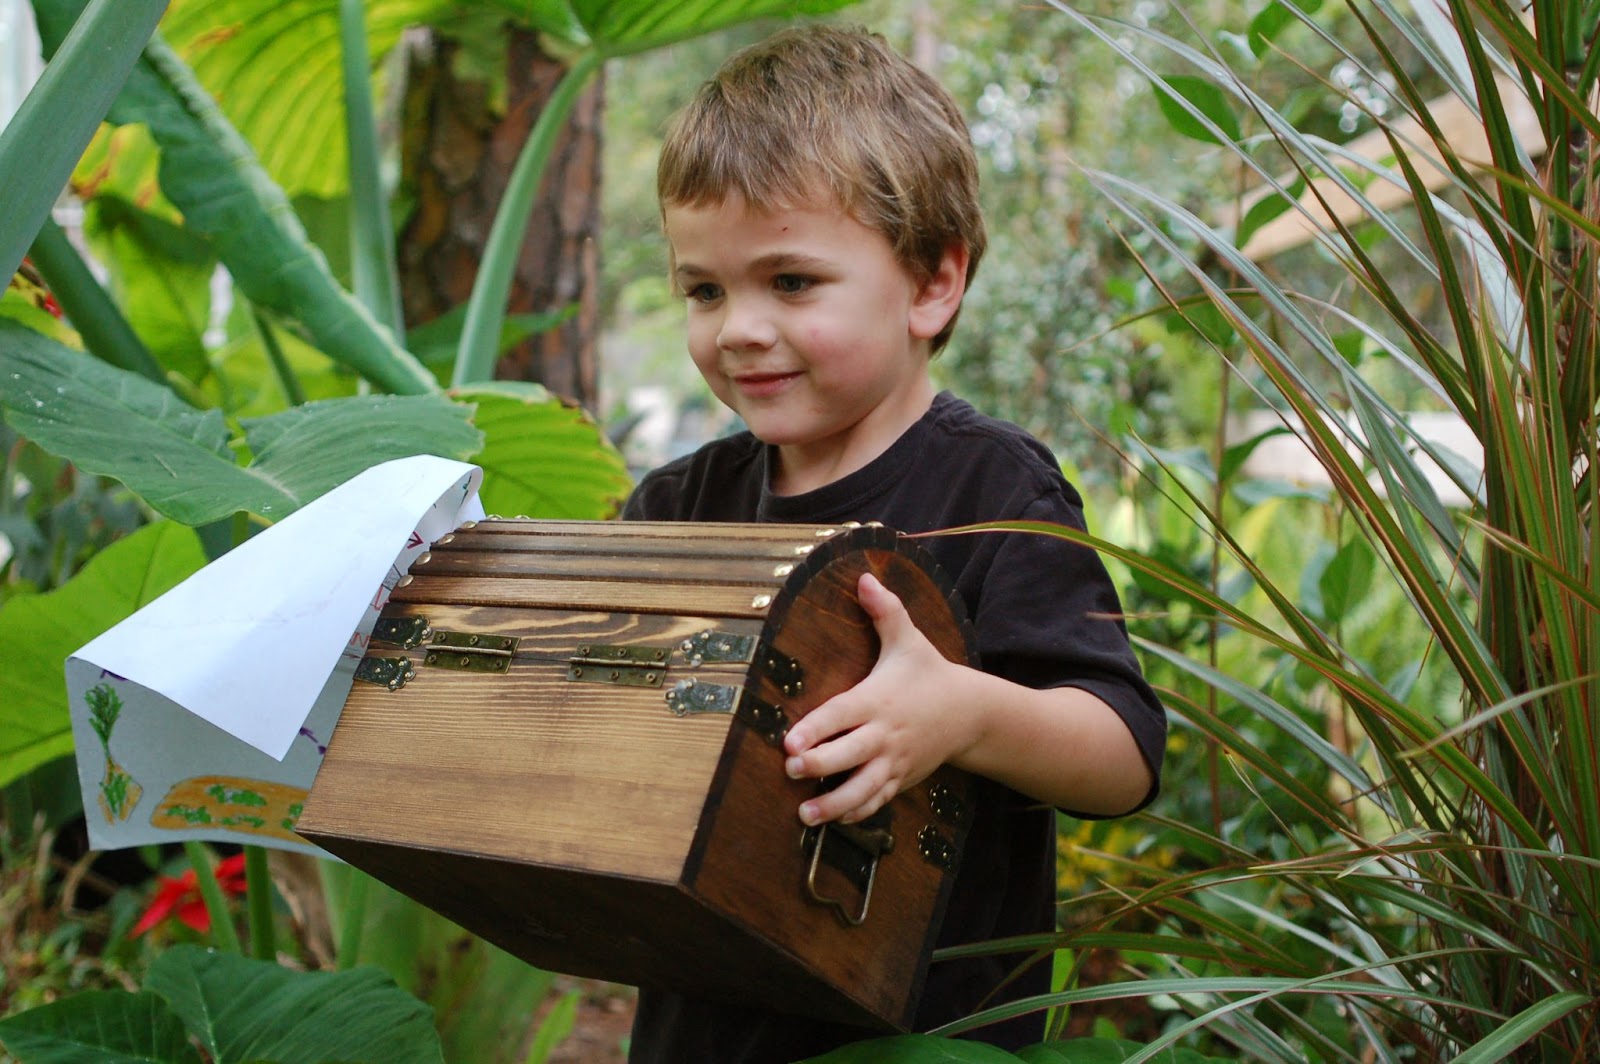 A happy kid carrying a treasure chest box in an outdoor setting.  